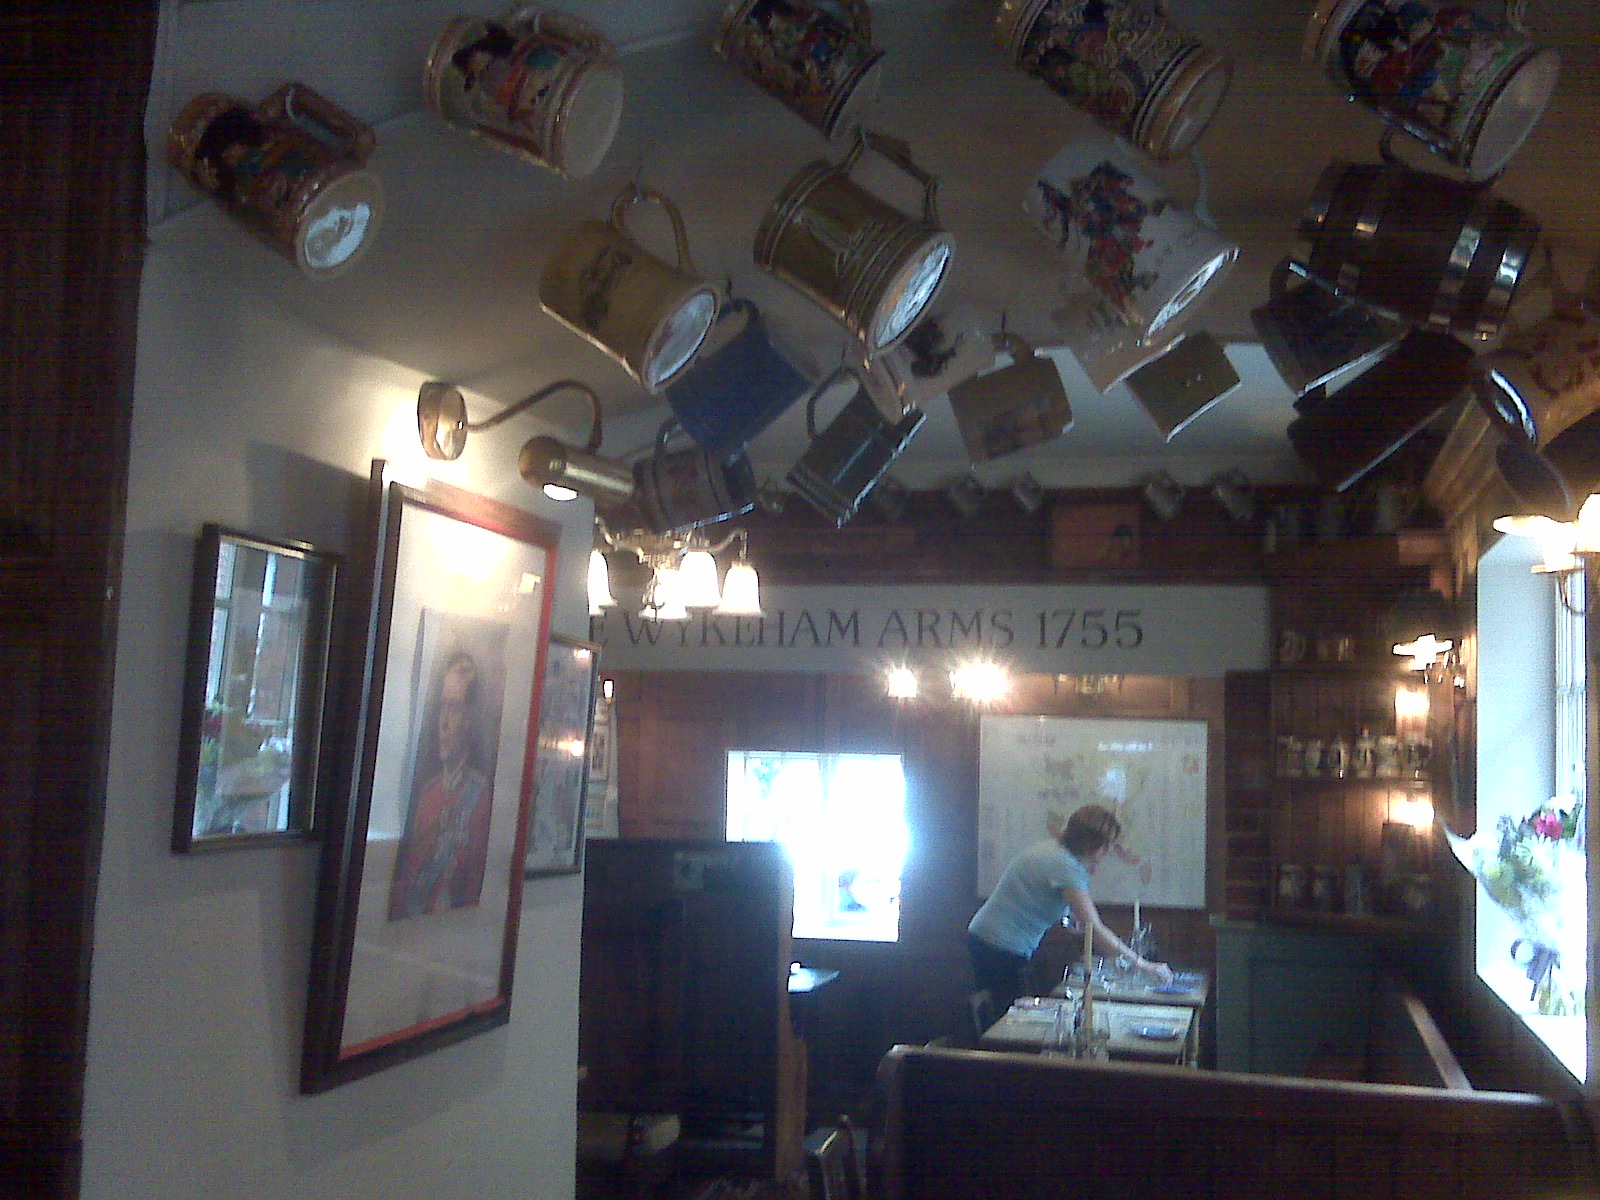 Mugs hanging from the ceiling, Wykeham Arms, Winchester